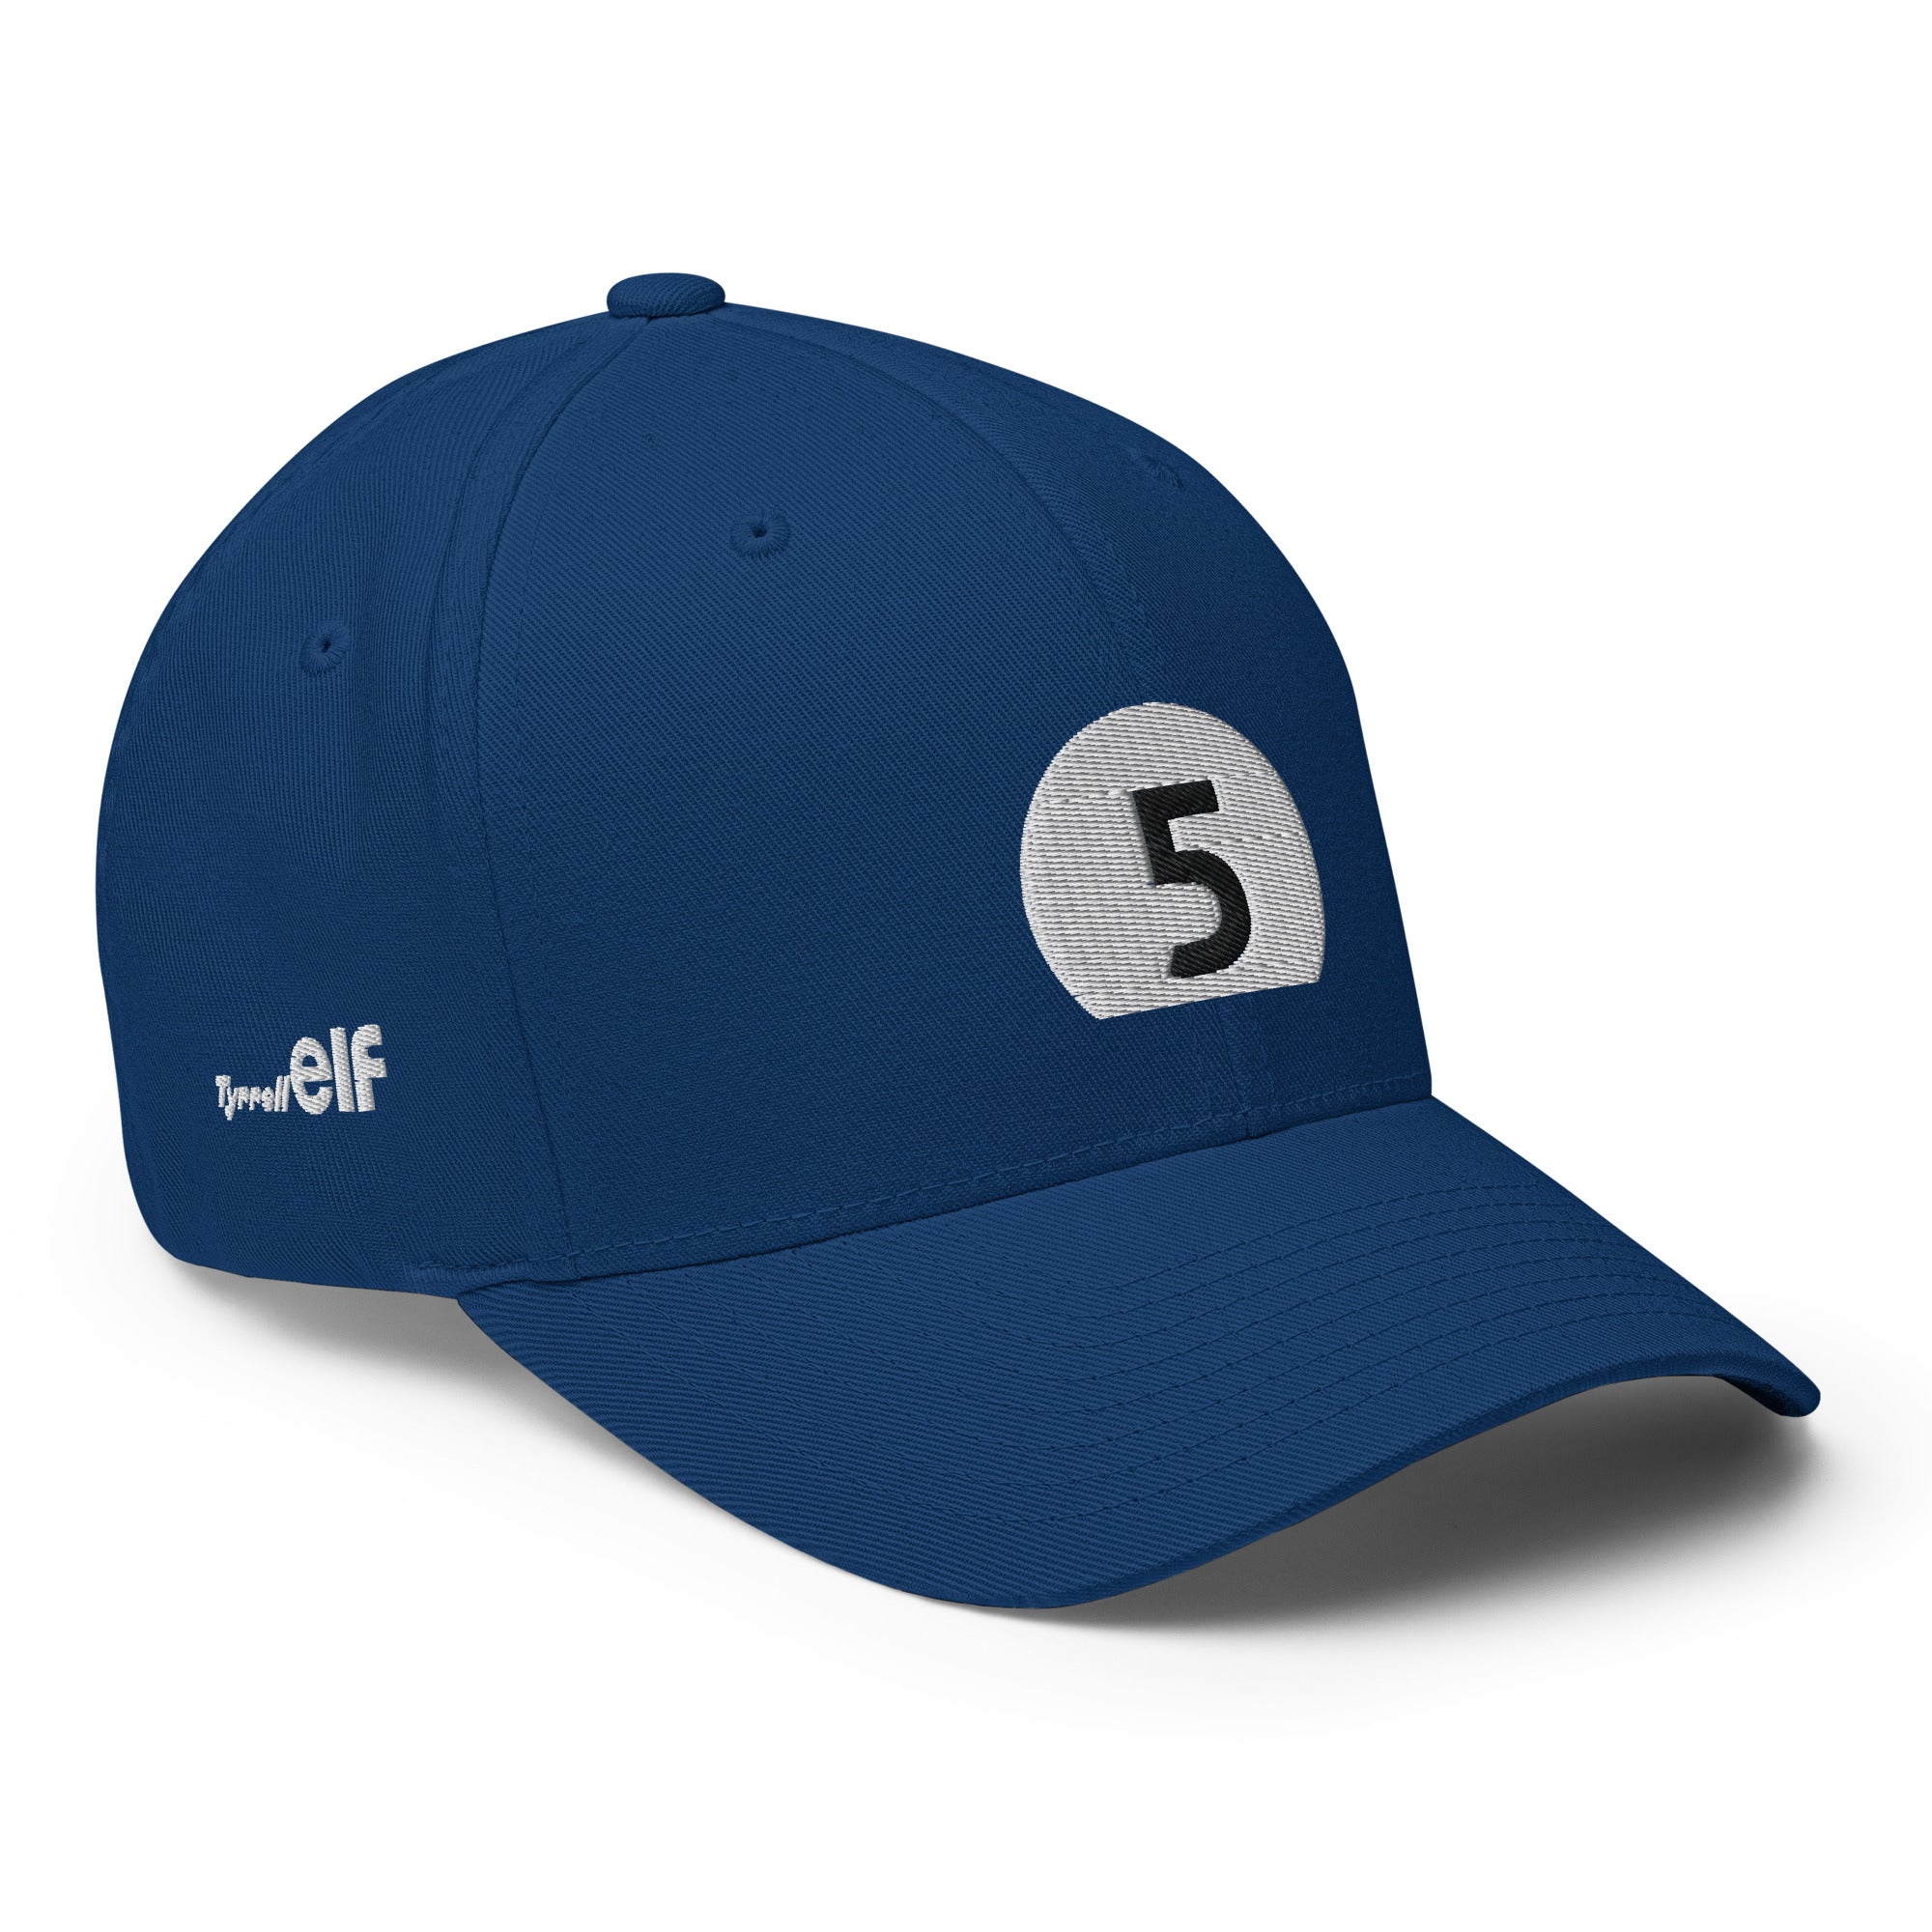 5: Elf Tyrrell Ford Racing - Jackie Stewart Blue cap right front side